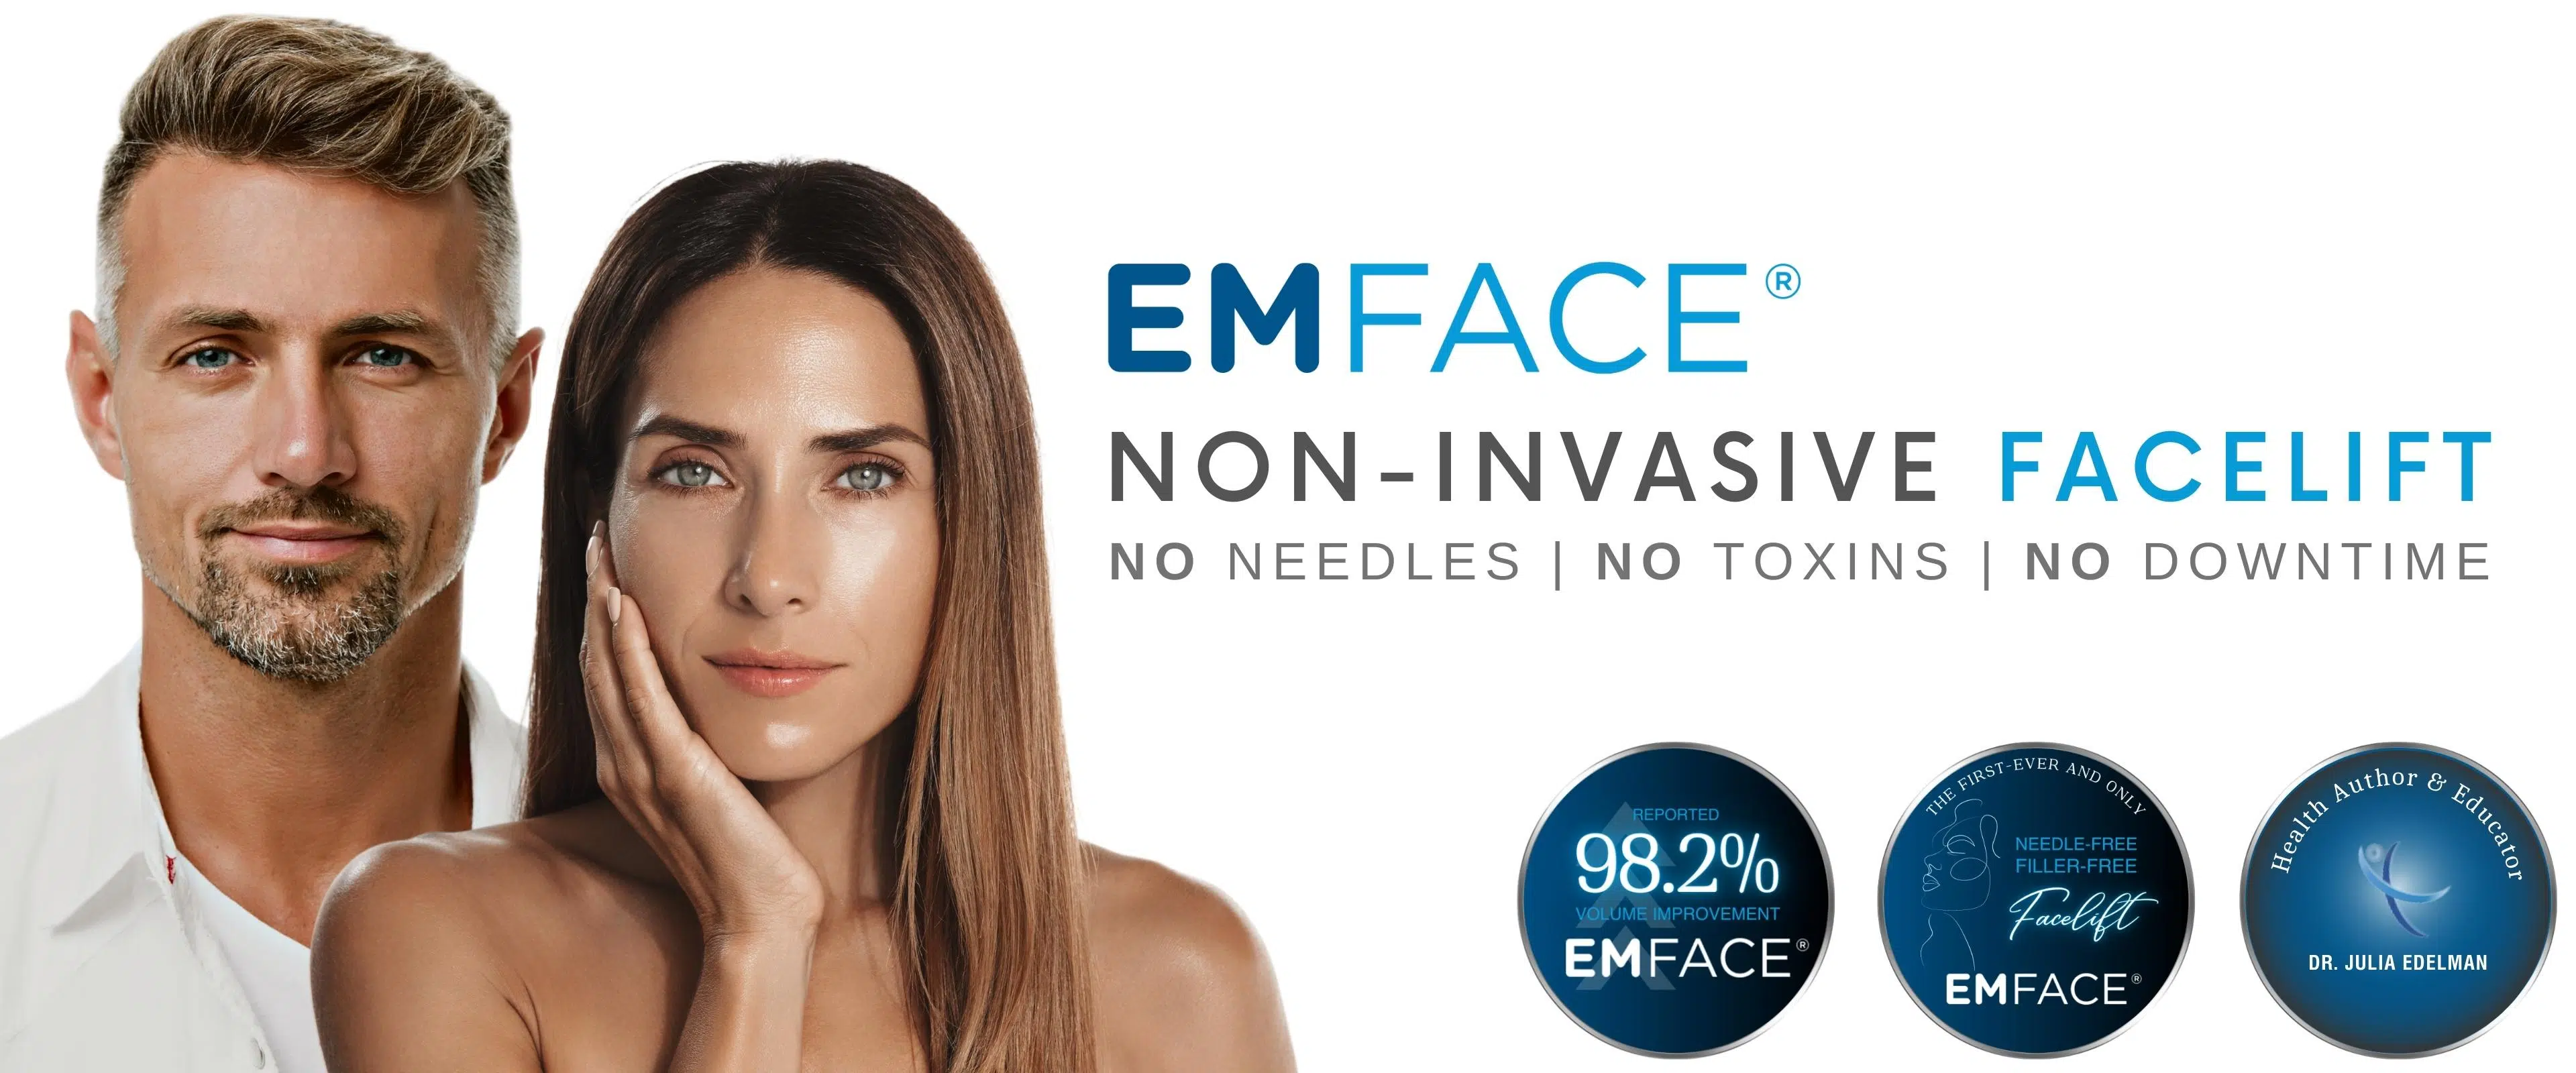 Emface review: the 20 minute needle-free facelift that sculpted my jawline, Beauty